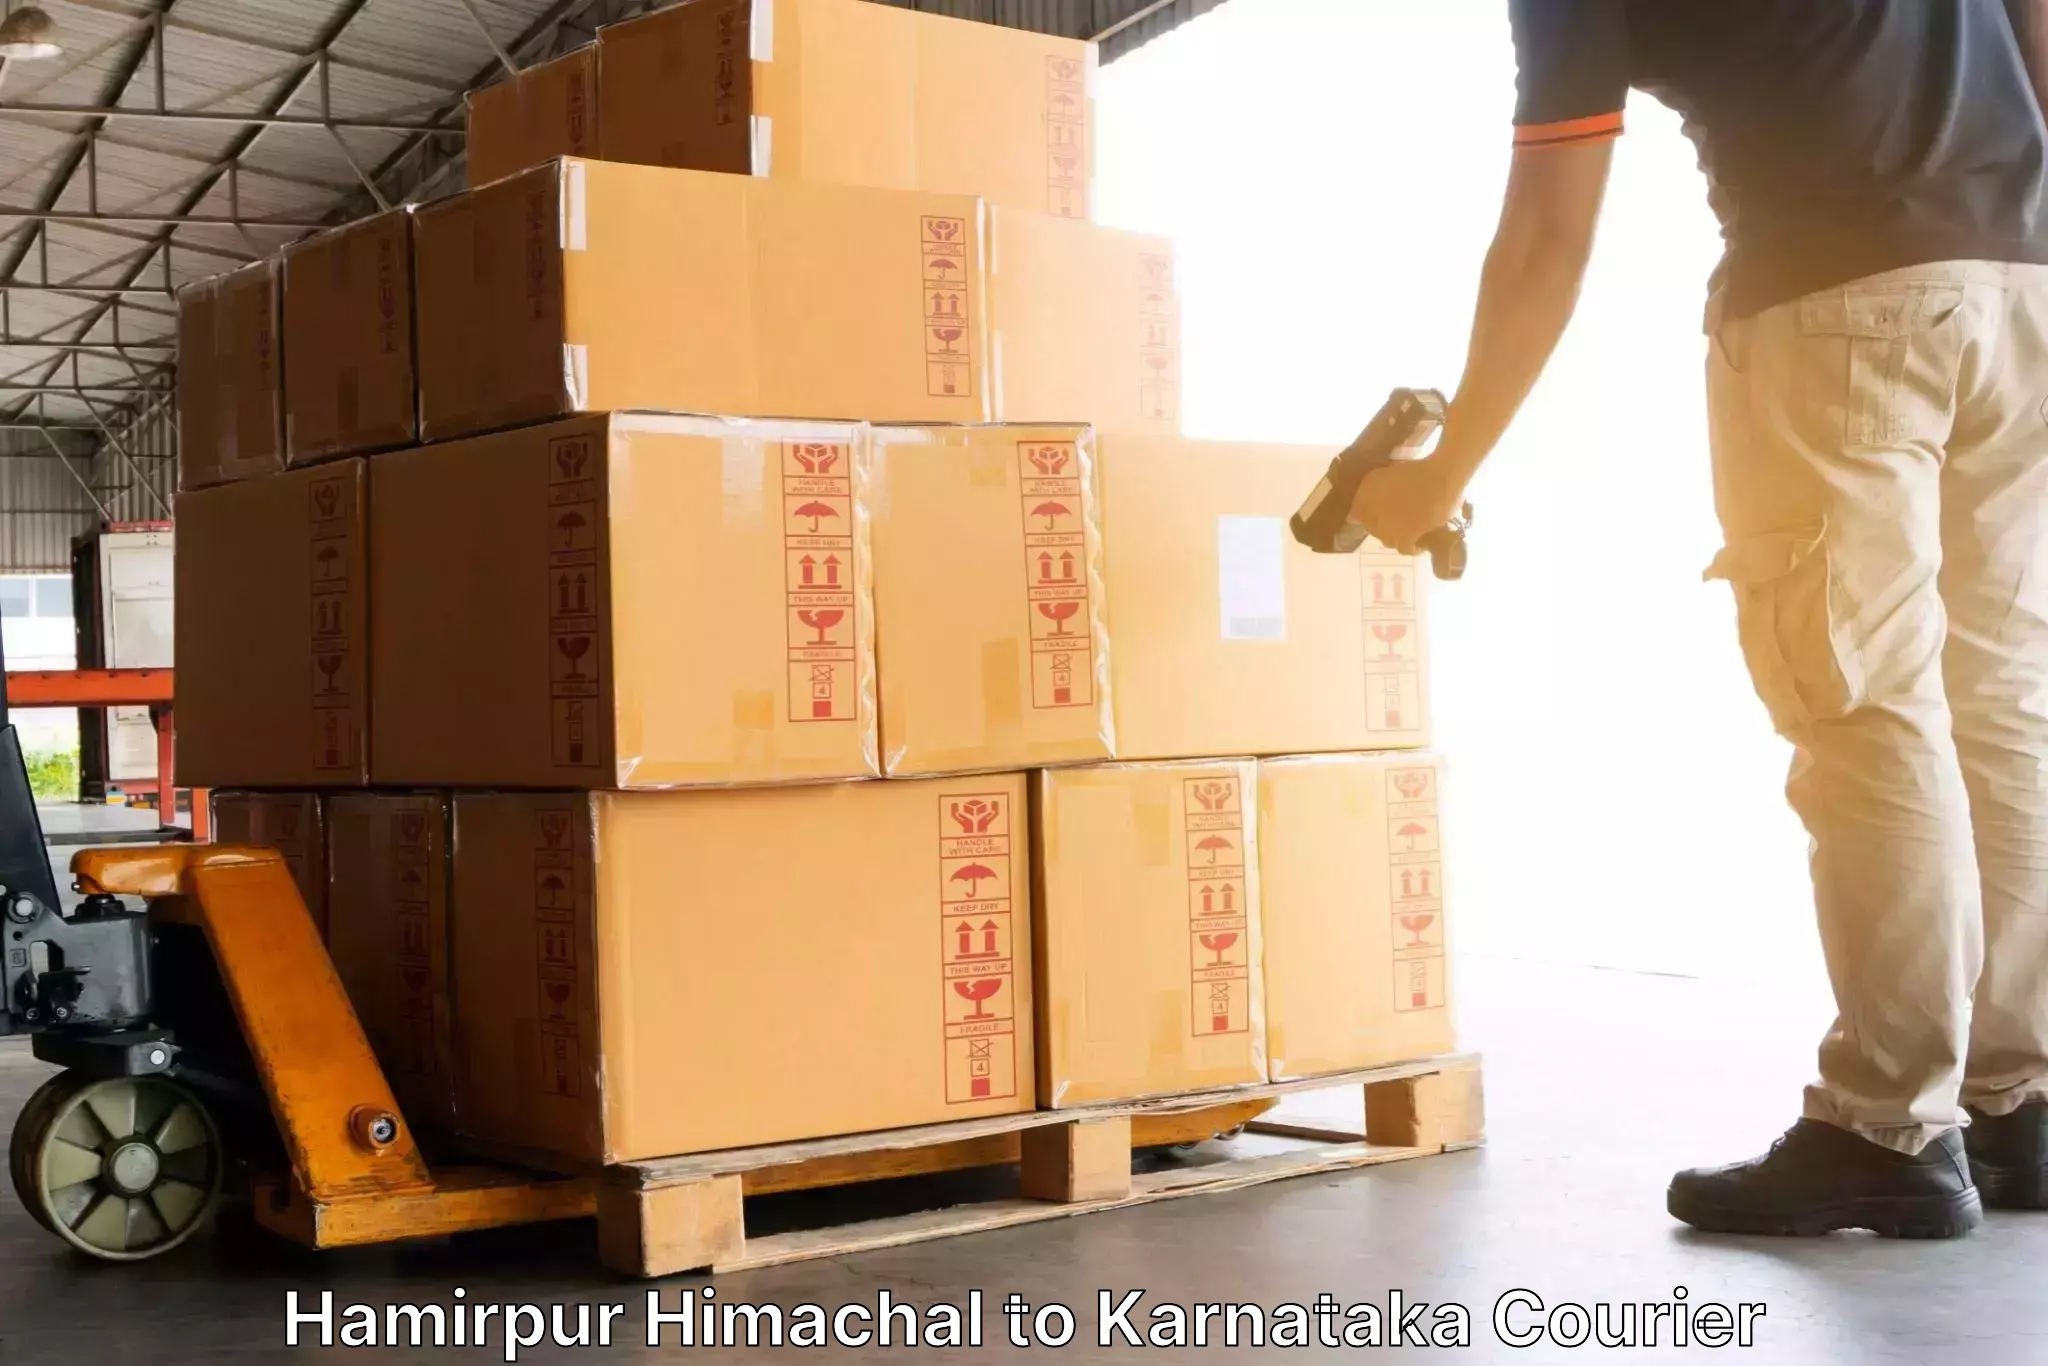 State-of-the-art courier technology Hamirpur Himachal to Ankola